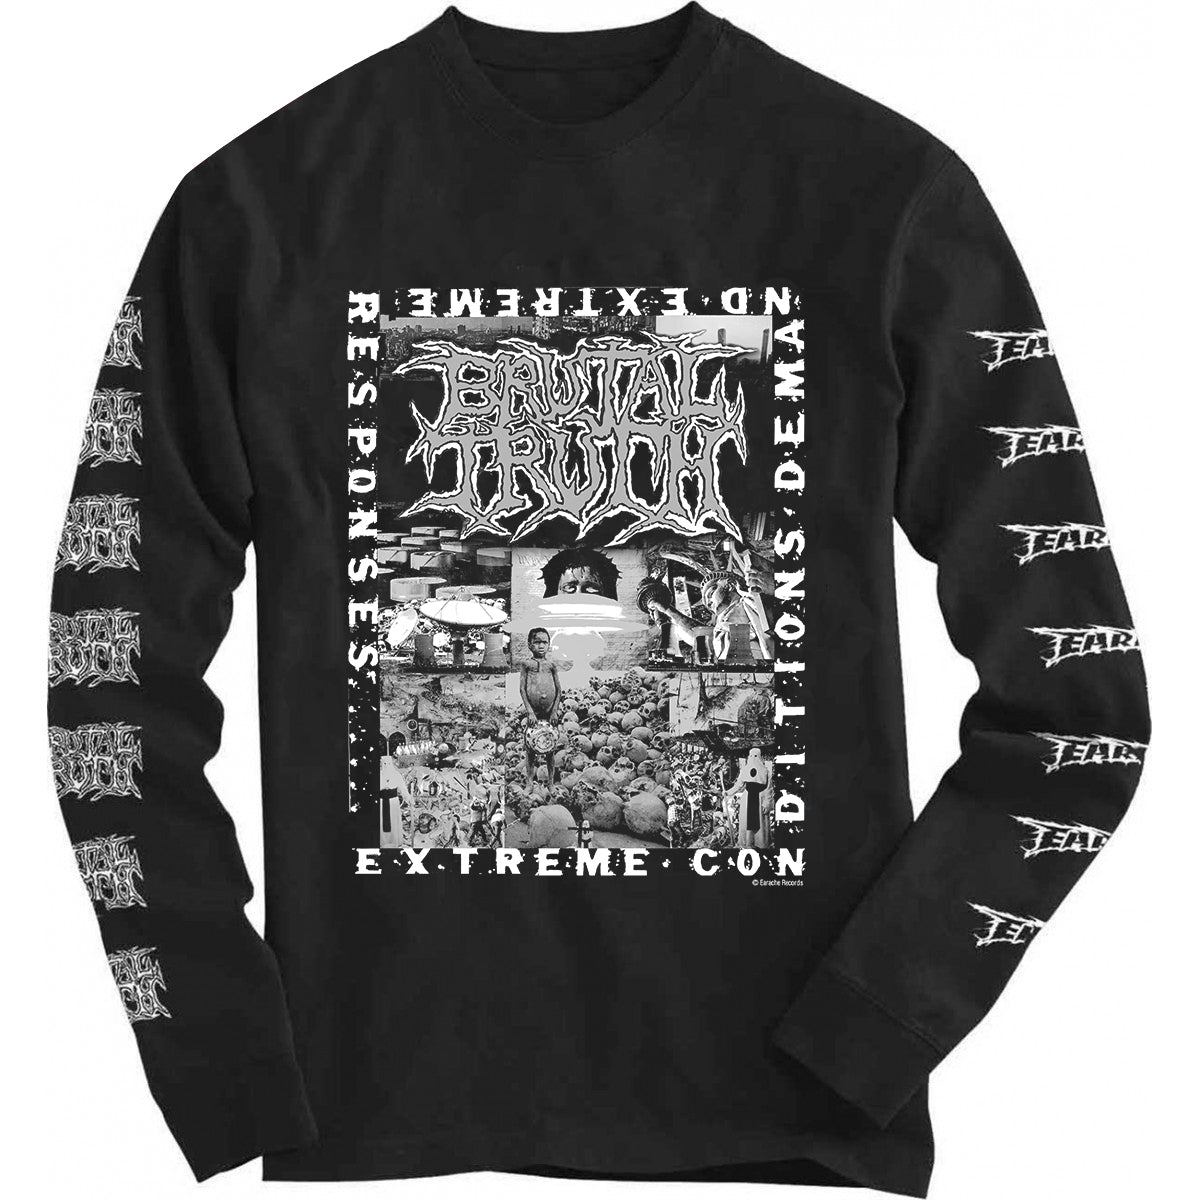 Brutal Truth "Extreme Conditions Demand Extreme Responses" Long Sleeve T shirt